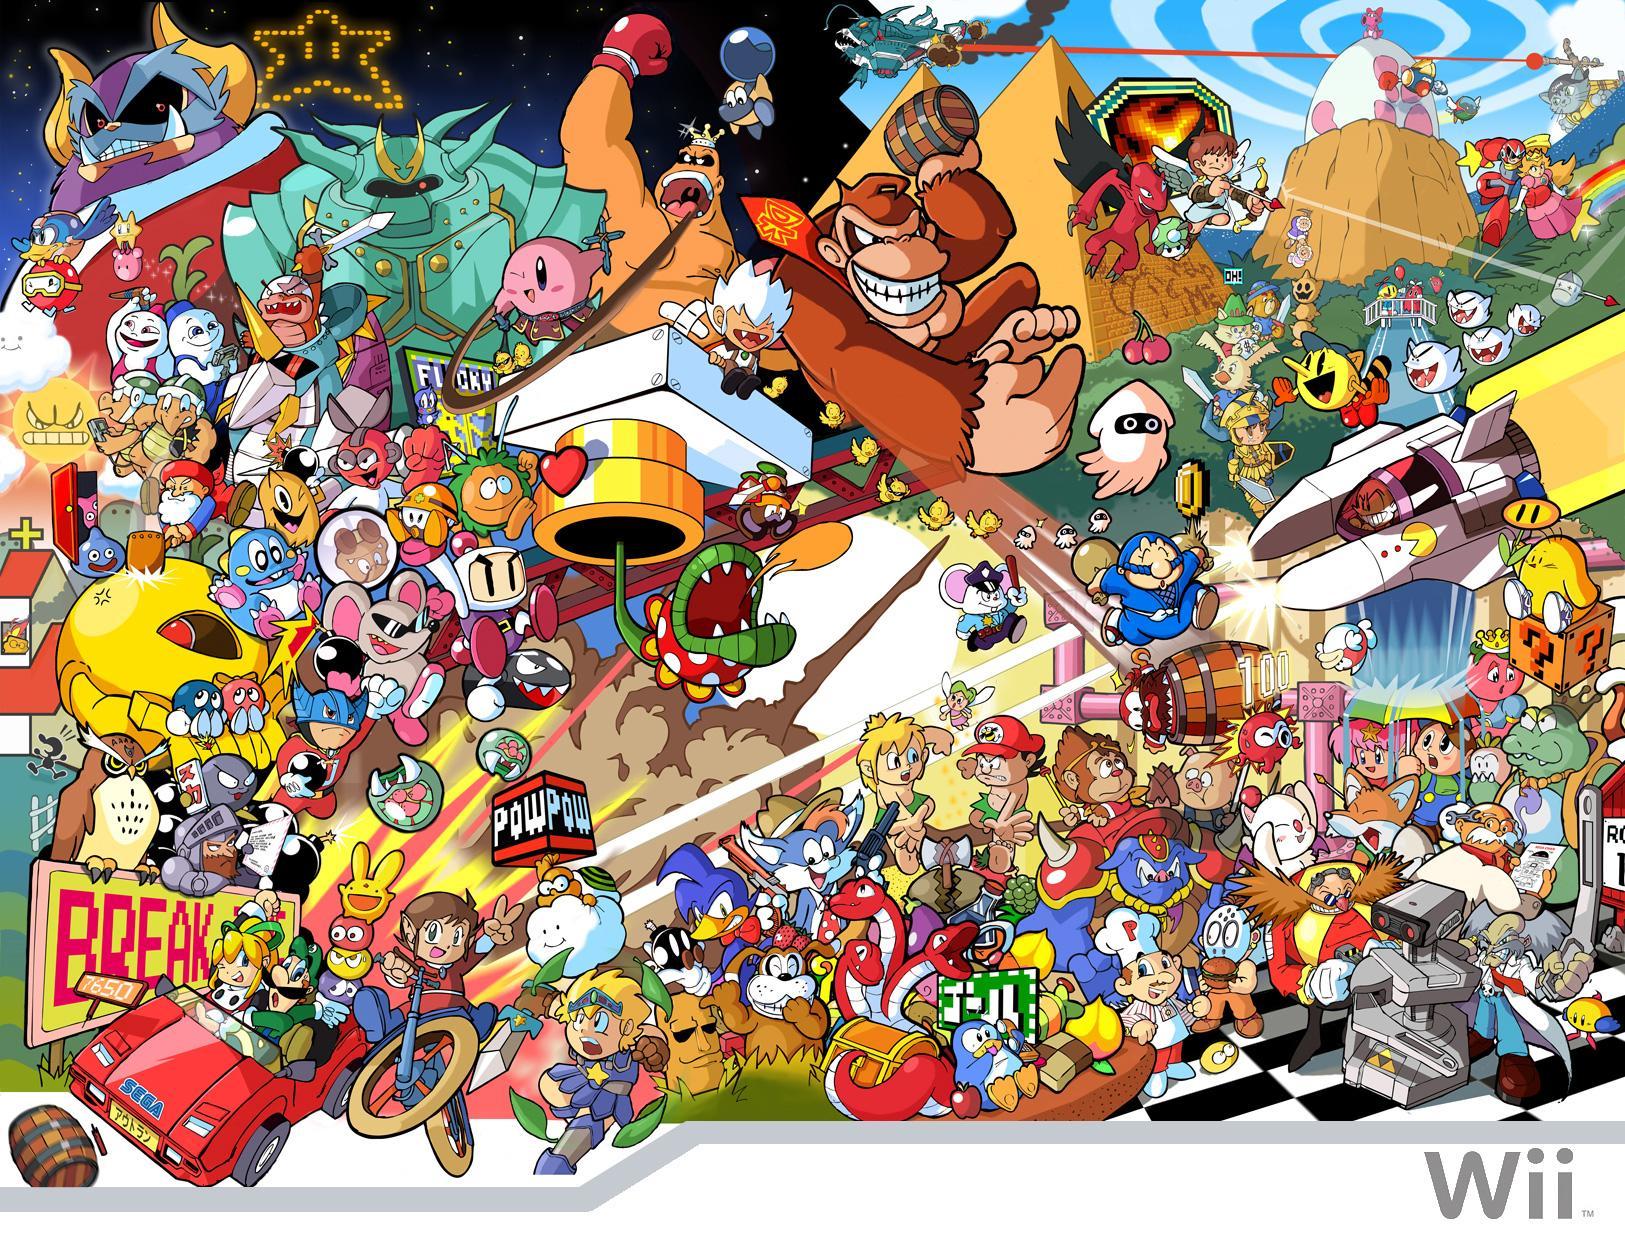 87 Nintendo HD Wallpapers | Backgrounds - Wallpaper Abyss - Page 2